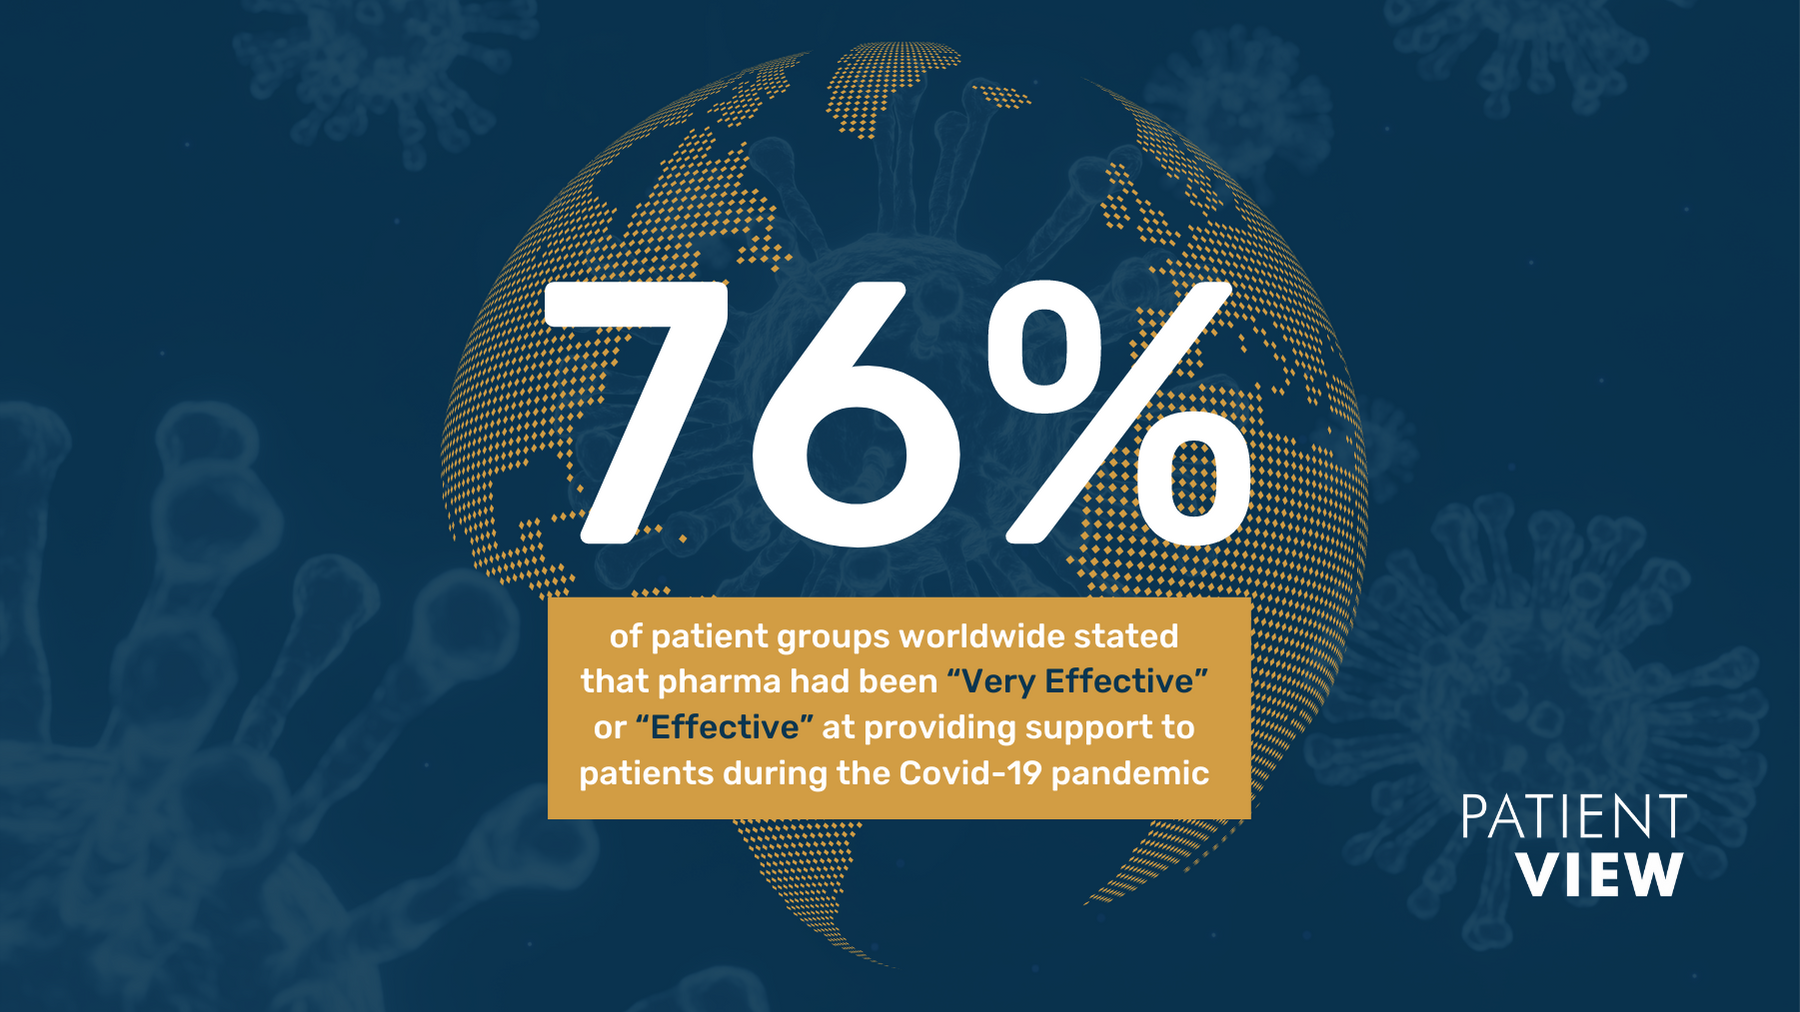 Pharma’s support to patient groups during the Covid-19 pandemic – is applauded